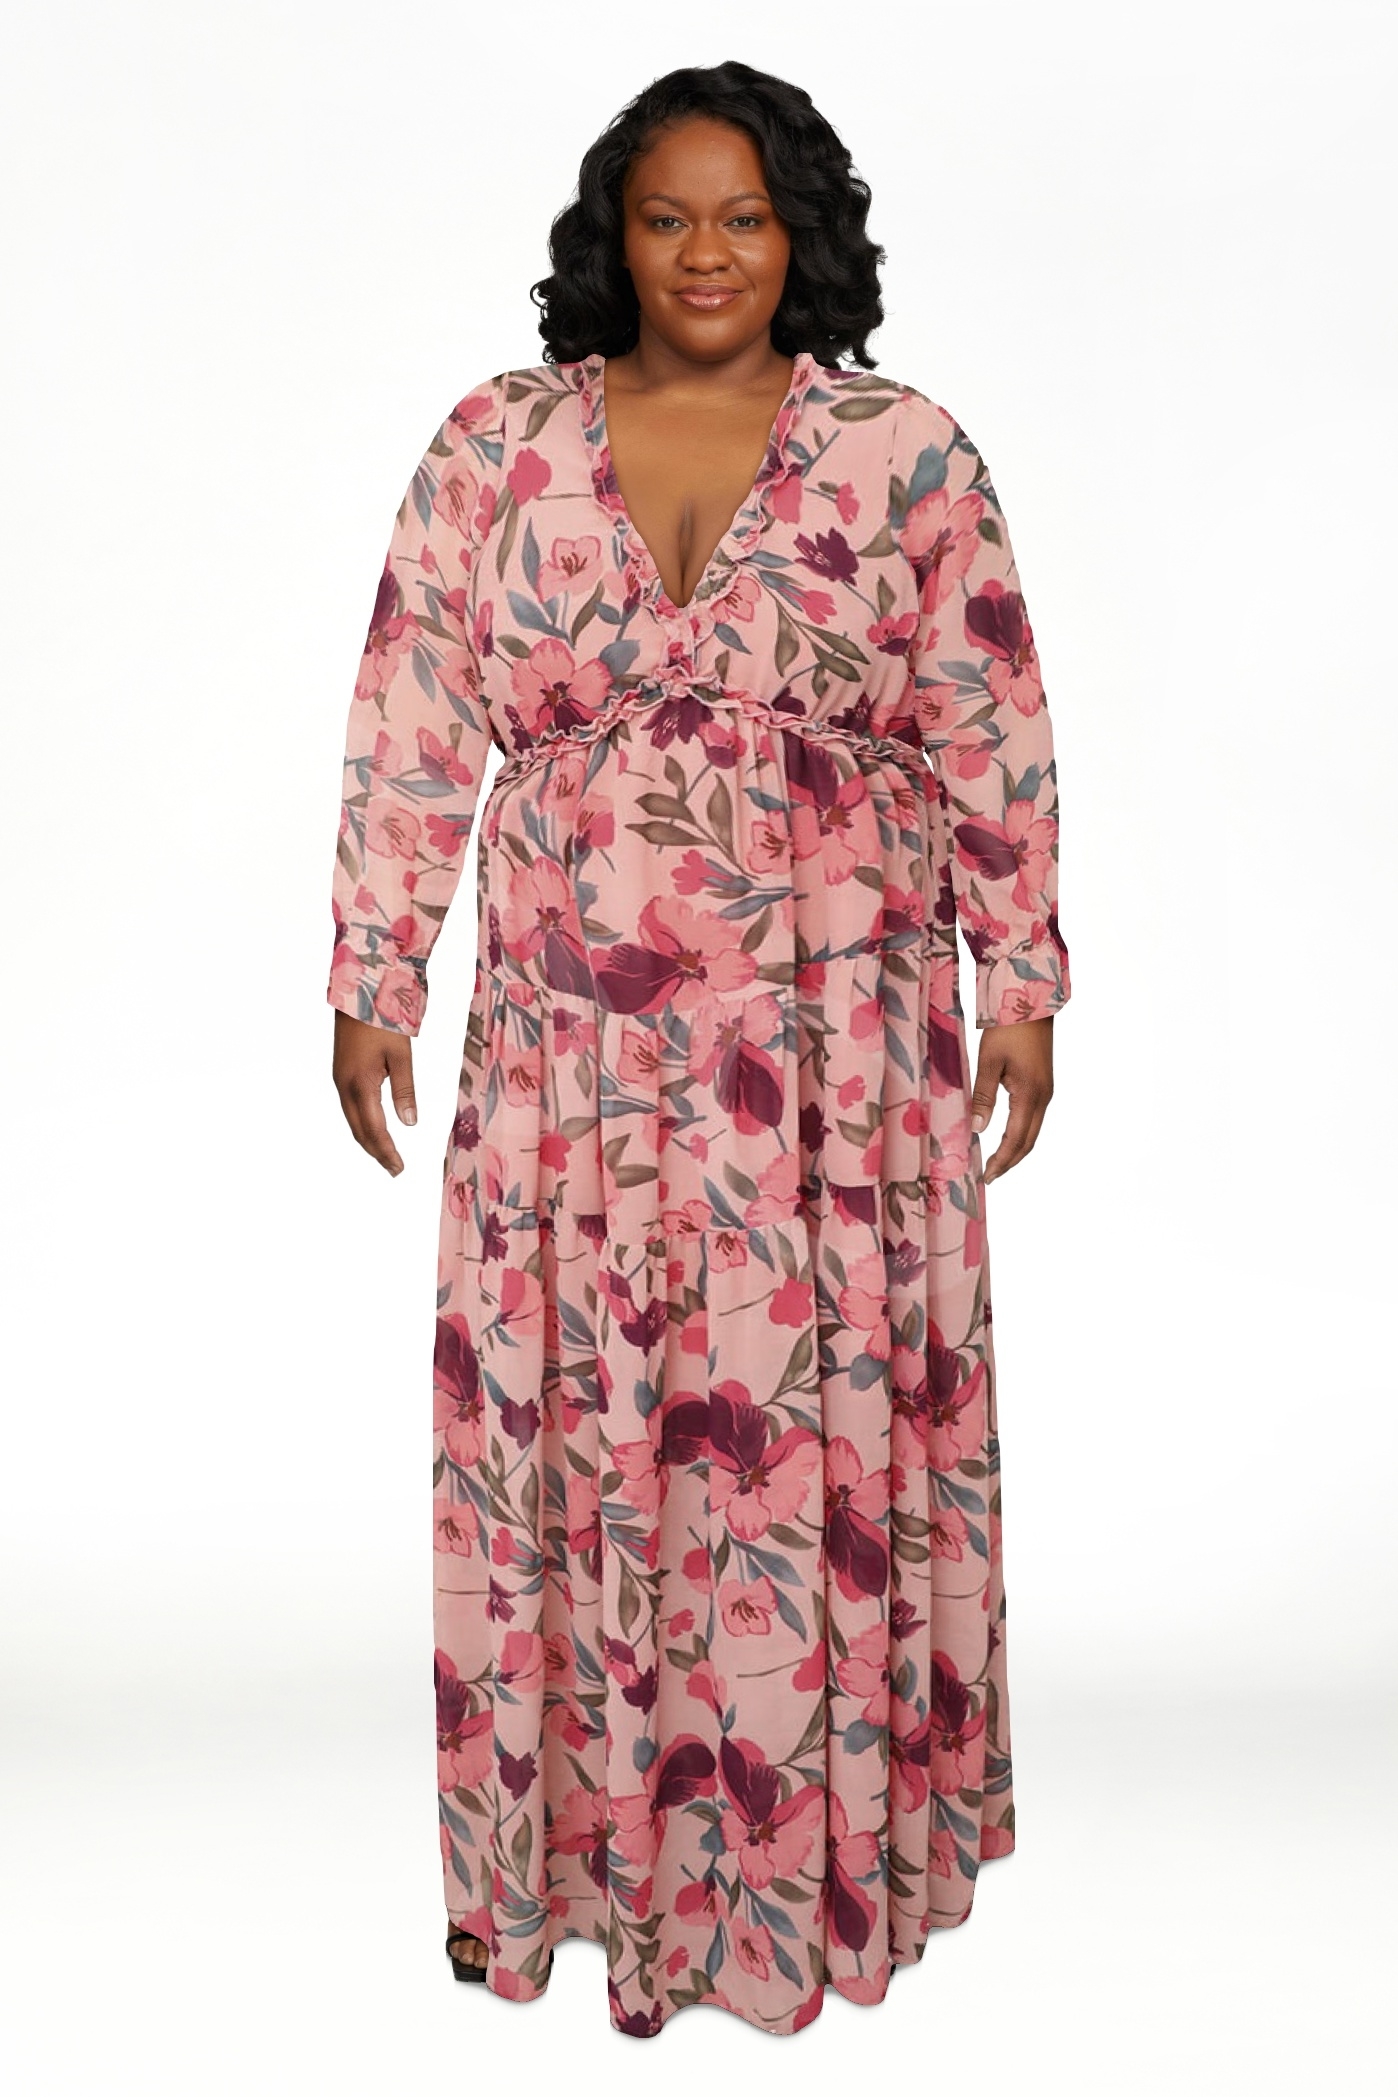 Model in a floral wrap dress standing against a white background